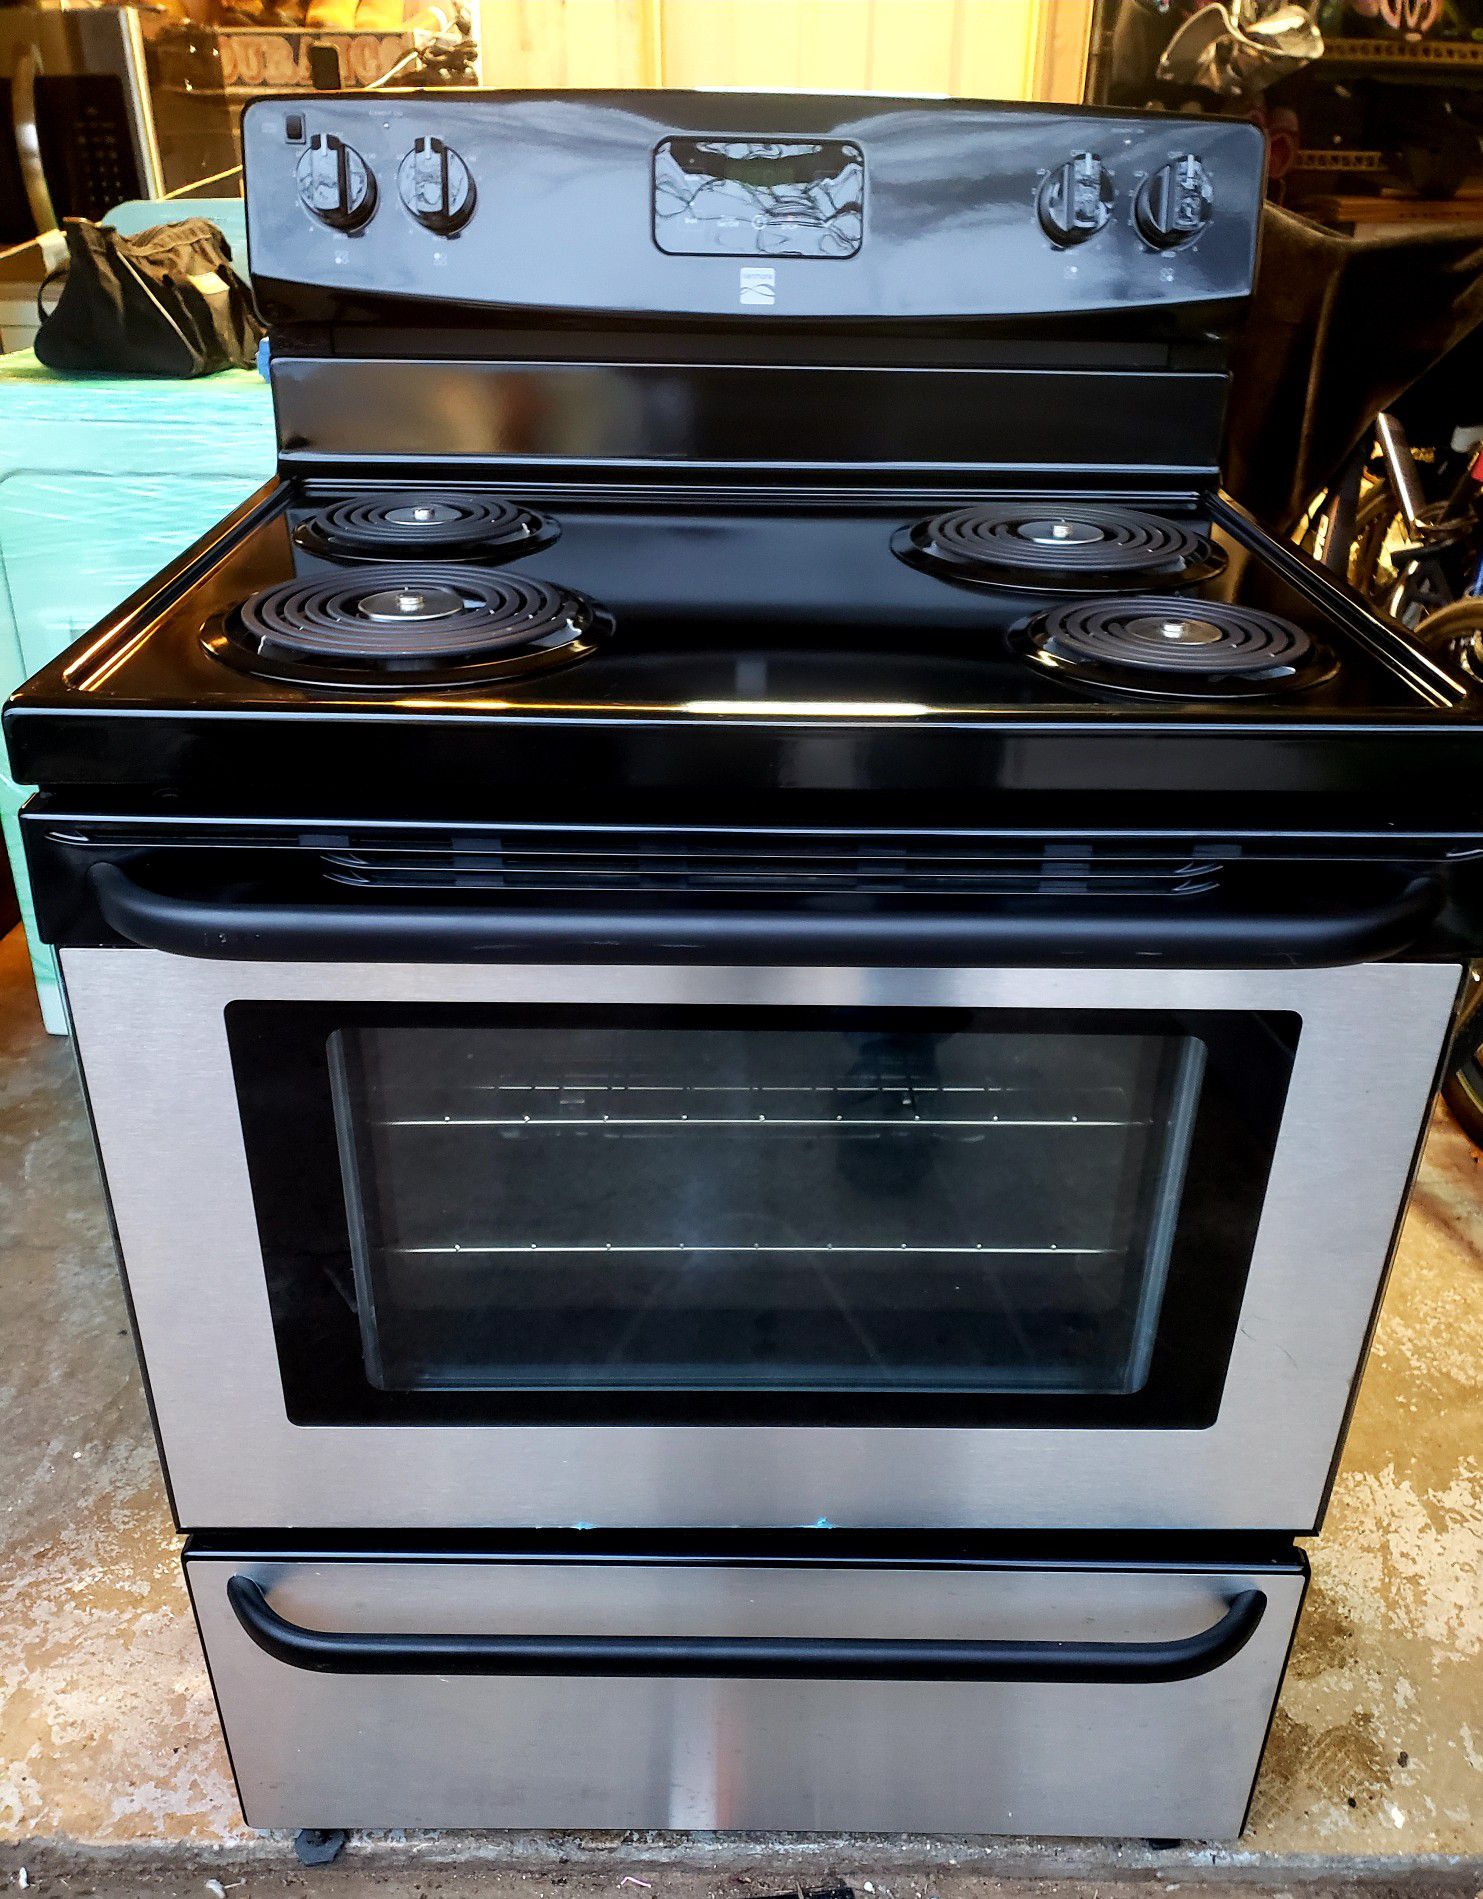 KENMORE ELECTRIC STOVE, BRAND NEW, STAINLESS STEEL & BLACK, DELIVERY AVAILABLE.